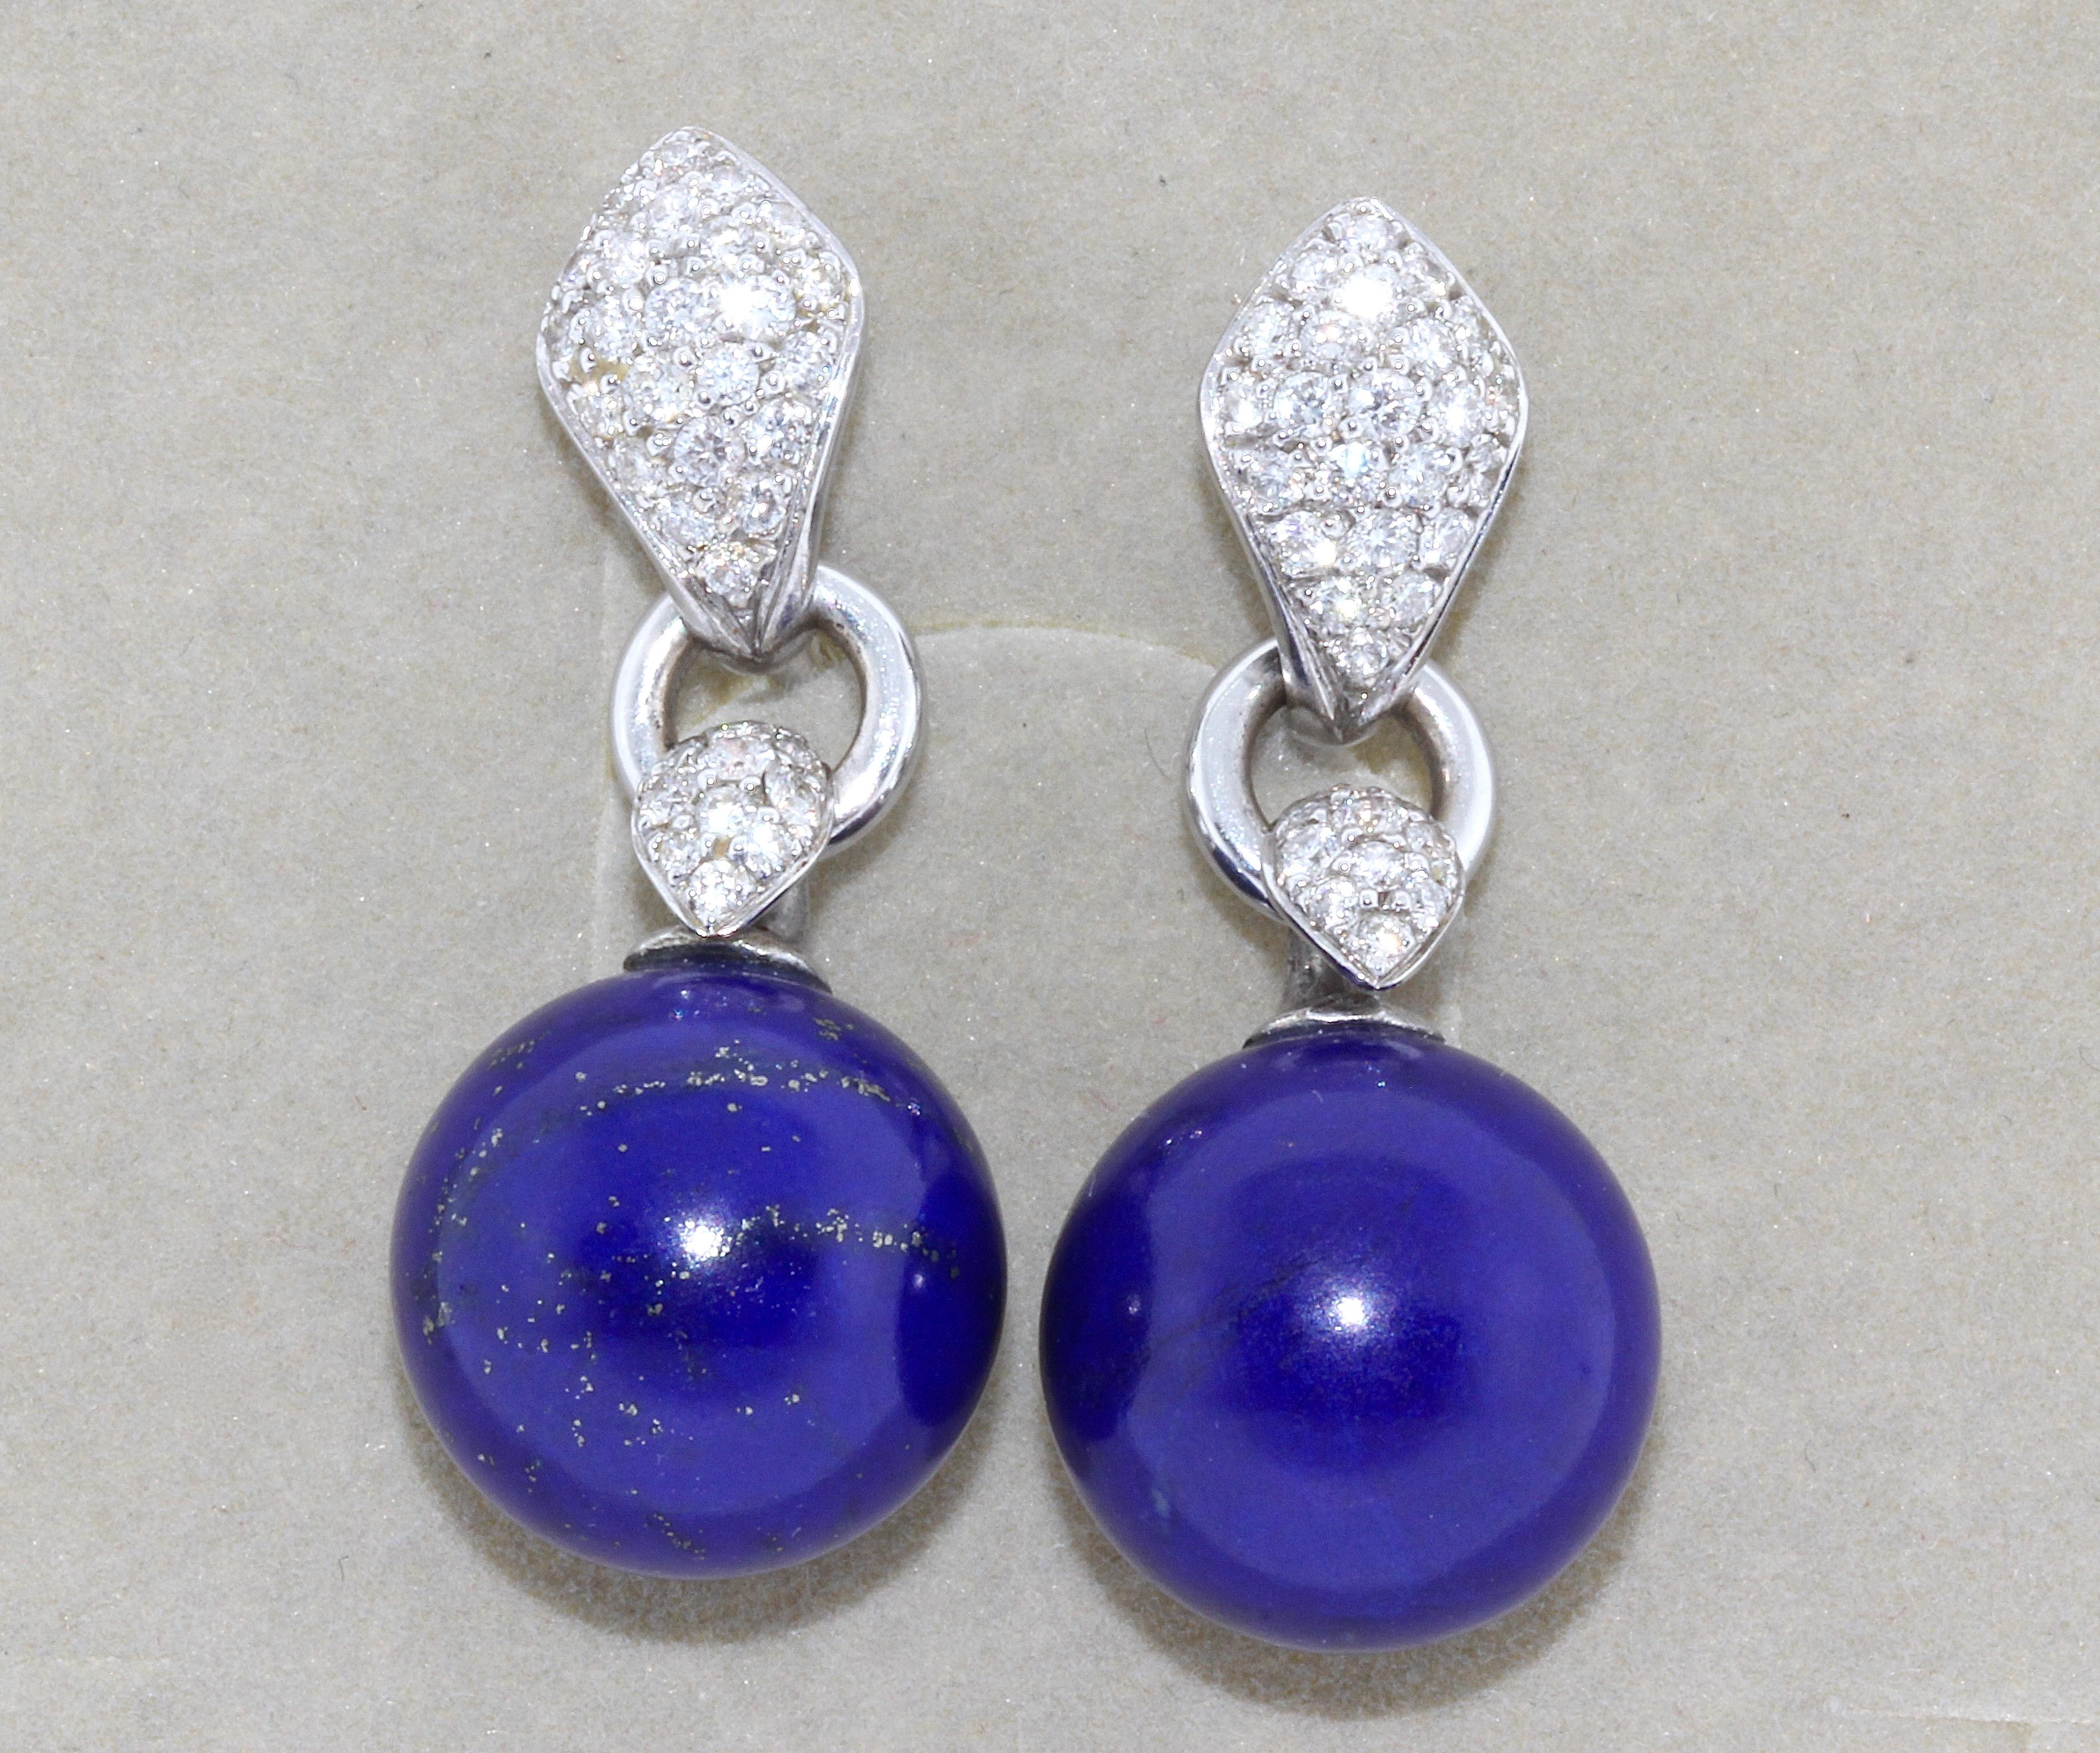 Elegant white gold lapis lazuli stud earrings with diamonds. Italian designer brand Utopia.

UTOPIA is the fine jewelry brand of Gaia SpA, an Italian company that has been operating internationally for over 70 years and manufactures and sells